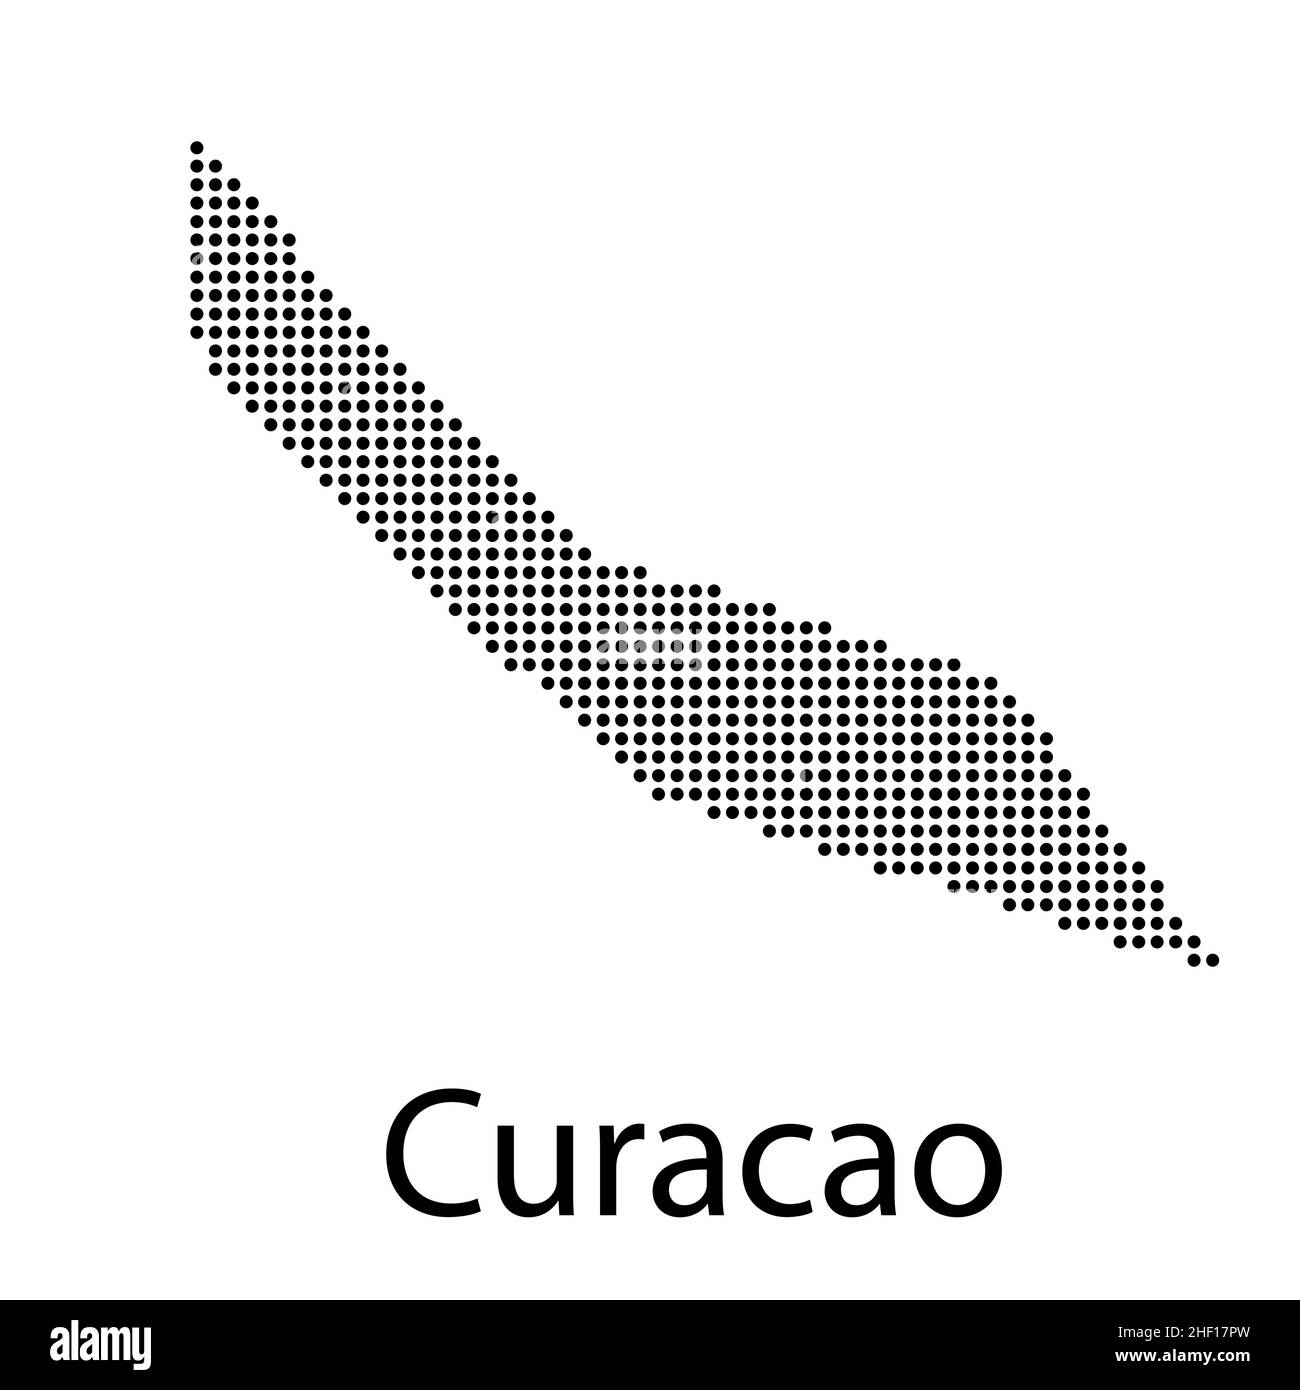 Curacao map geometric background texture vector illustration Stock Vector